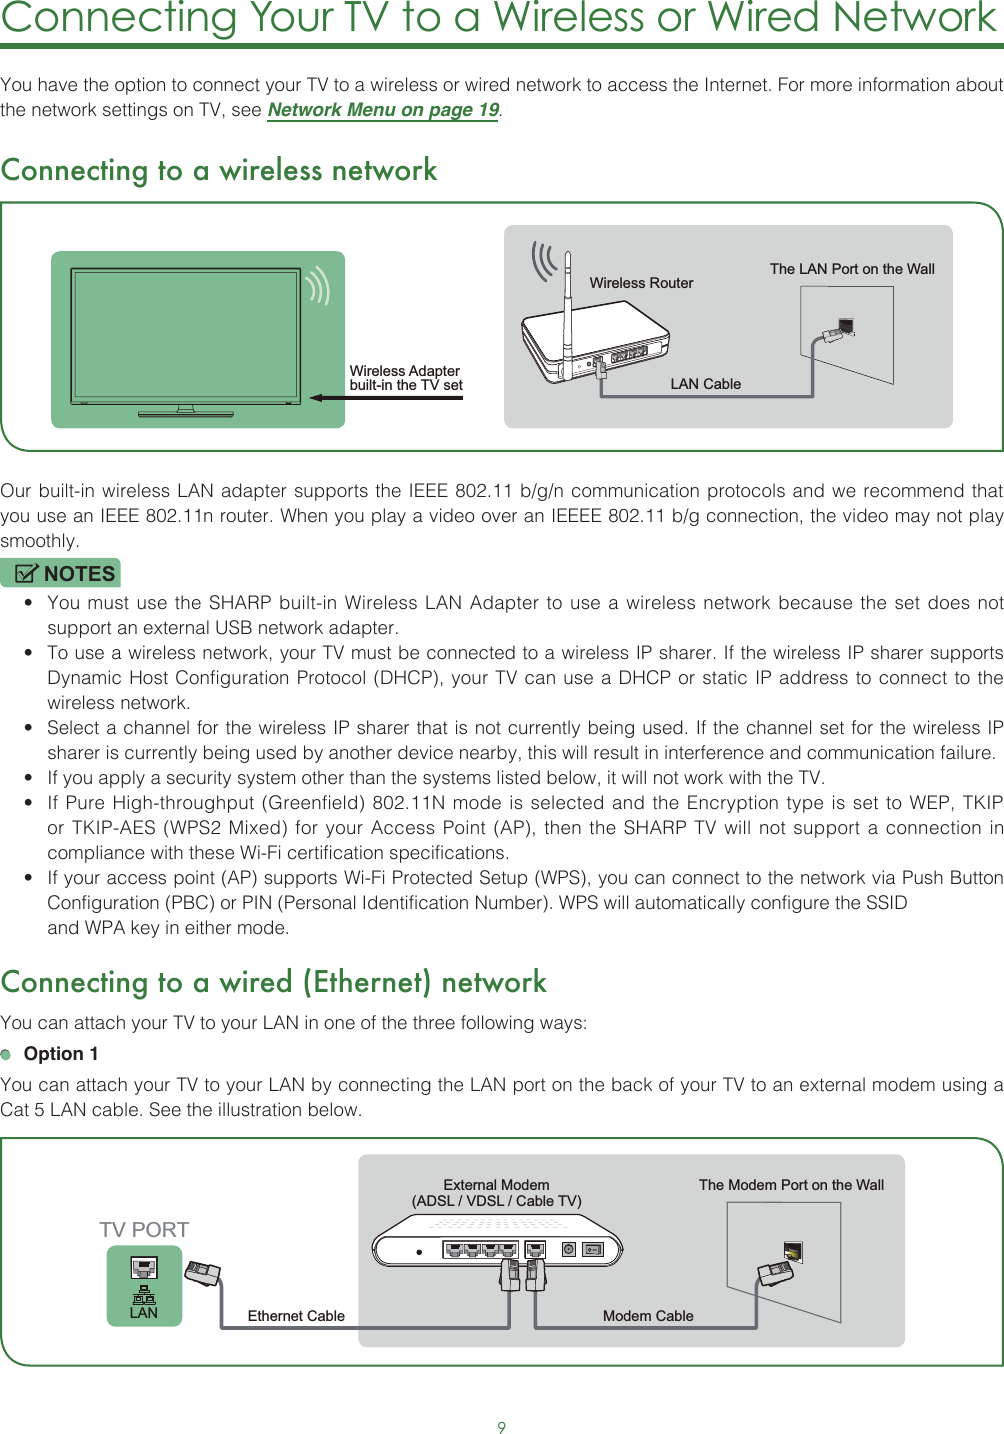 9Connecting Your TV to a Wireless or Wired Network You have the option to connect your TV to a wireless or wired network to access the Internet. For more information about the network settings on TV, see Network Menu on page 19.Connecting to a wireless network Our built-in wireless LAN adapter supports the IEEE 802.11 b/g/n communication protocols and we recommend that you use an IEEE 802.11n router. When you play a video over an IEEEE 802.11 b/g connection, the video may not play smoothly.NOTES• You must use the SHARP built-in Wireless LAN Adapter to use a wireless network because the set does not support an external USB network adapter.• To use a wireless network, your TV must be connected to a wireless IP sharer. If the wireless IP sharer supports Dynamic Host Configuration Protocol (DHCP), your TV can use a DHCP or static IP address to connect to the wireless network.• Select a channel for the wireless IP sharer that is not currently being used. If the channel set for the wireless IP sharer is currently being used by another device nearby, this will result in interference and communication failure.• If you apply a security system other than the systems listed below, it will not work with the TV.• If Pure High-throughput (Greenfield) 802.11N mode is selected and the Encryption type is set to WEP, TKIP or TKIP-AES (WPS2 Mixed) for your Access Point (AP), then the SHARP TV will not support a connection in compliance with these Wi-Fi certification specifications.• Ifyouraccesspoint(AP)supportsWi-FiProtectedSetup(WPS),youcanconnecttothenetworkviaPushButtonConfiguration (PBC) or PIN (Personal Identification Number). WPS will automatically configure the SSID   and WPA key in either mode.Connecting to a wired (Ethernet) networkYou can attach your TV to your LAN in one of the three following ways: Option 1You can attach your TV to your LAN by connecting the LAN port on the back of your TV to an external modem using a Cat 5 LAN cable. See the illustration below. Wireless Adapterbuilt-in the TV set  LAN CableWireless Router The LAN Port on the WallExternal Modem(ADSL / VDSL / Cable TV)  The Modem Port on the WallEthernet Cable  Modem Cable LANTV PORT